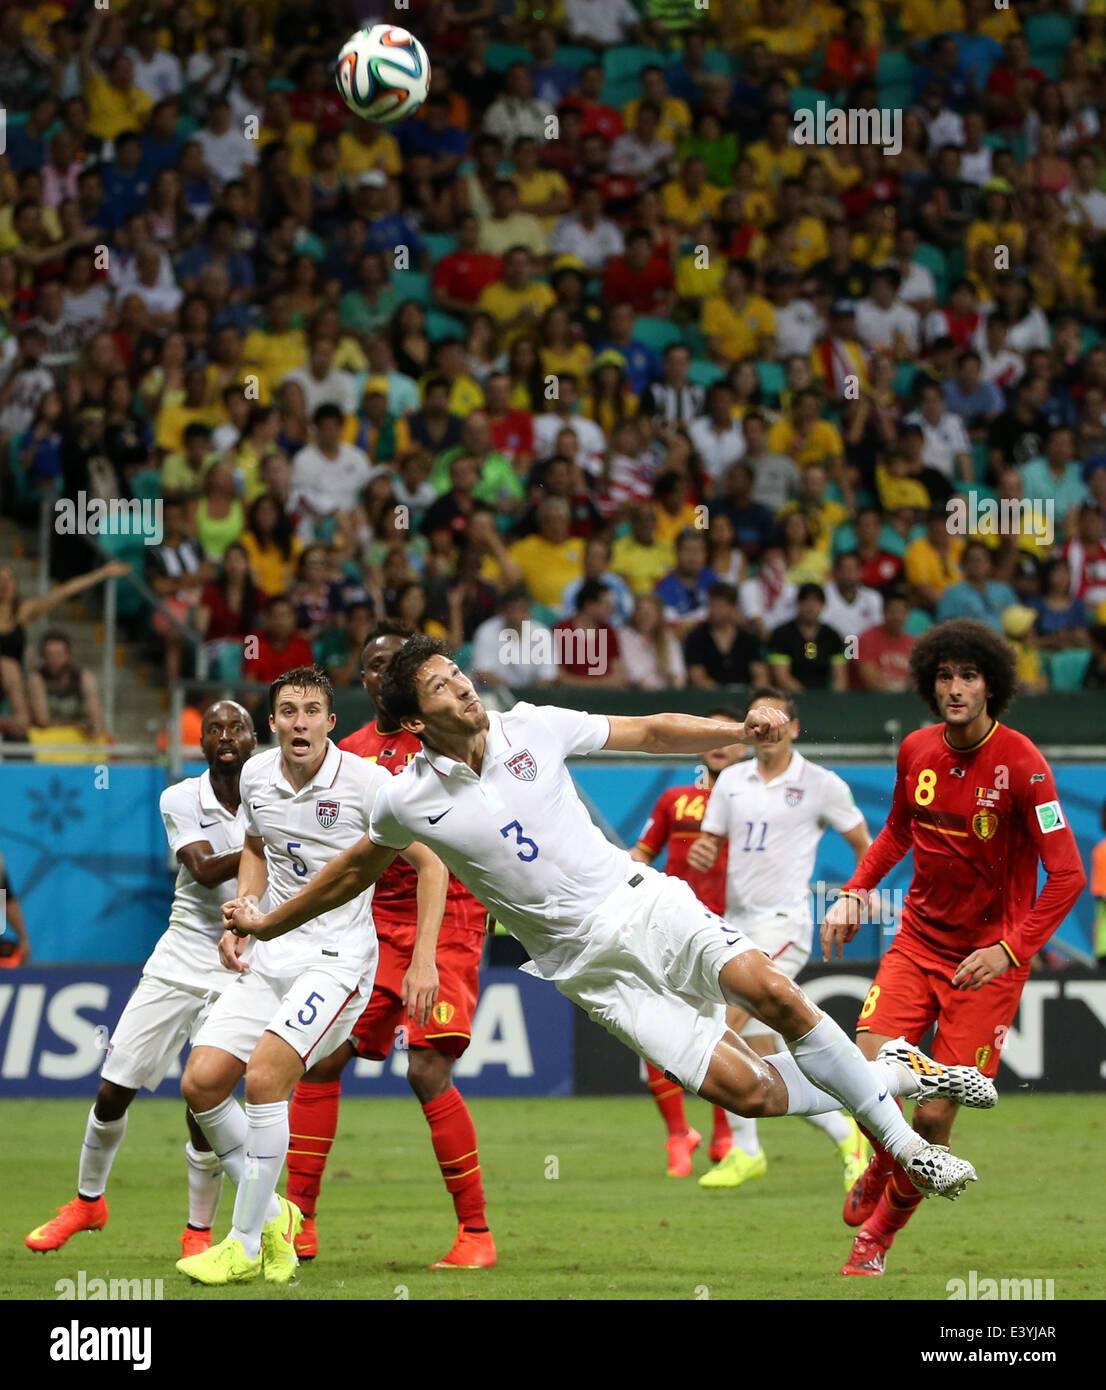 Salvador, Brazil. 1st July, 2014. Omar Gonzalez (C) of the U.S. vies for the ball during a Round of 16 match between Belgium and the U.S. of 2014 FIFA World Cup at the Arena Fonte Nova Stadium in Salvador, Brazil, on July 1, 2014. Belgium won 2-1 over the U.S. after 120 minutes and qualified for quarter-finals on Tuesday. Credit:  Cao Can/Xinhua/Alamy Live News Stock Photo